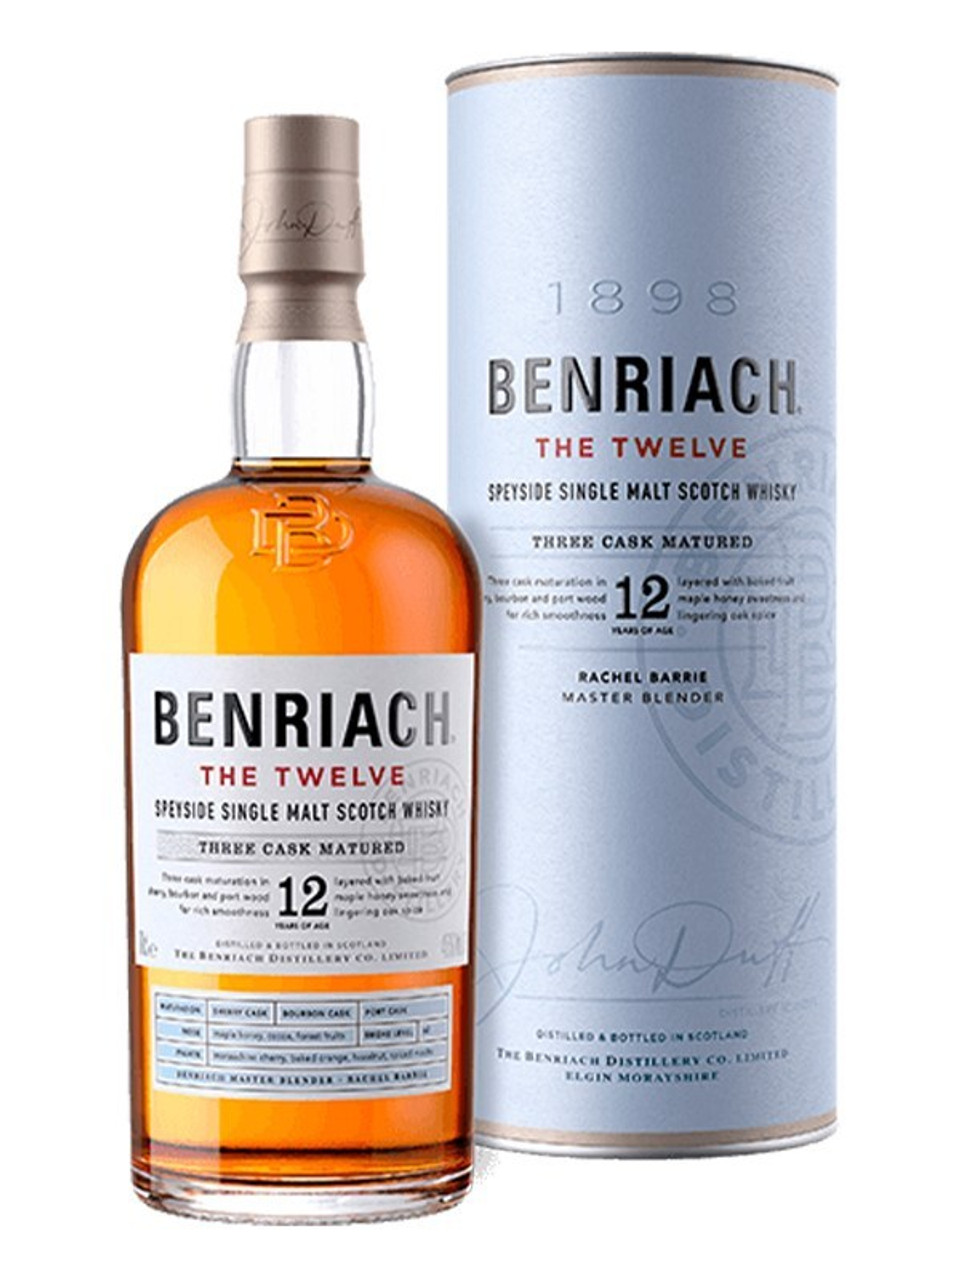 Benriach 12 Year Old, The Twelve